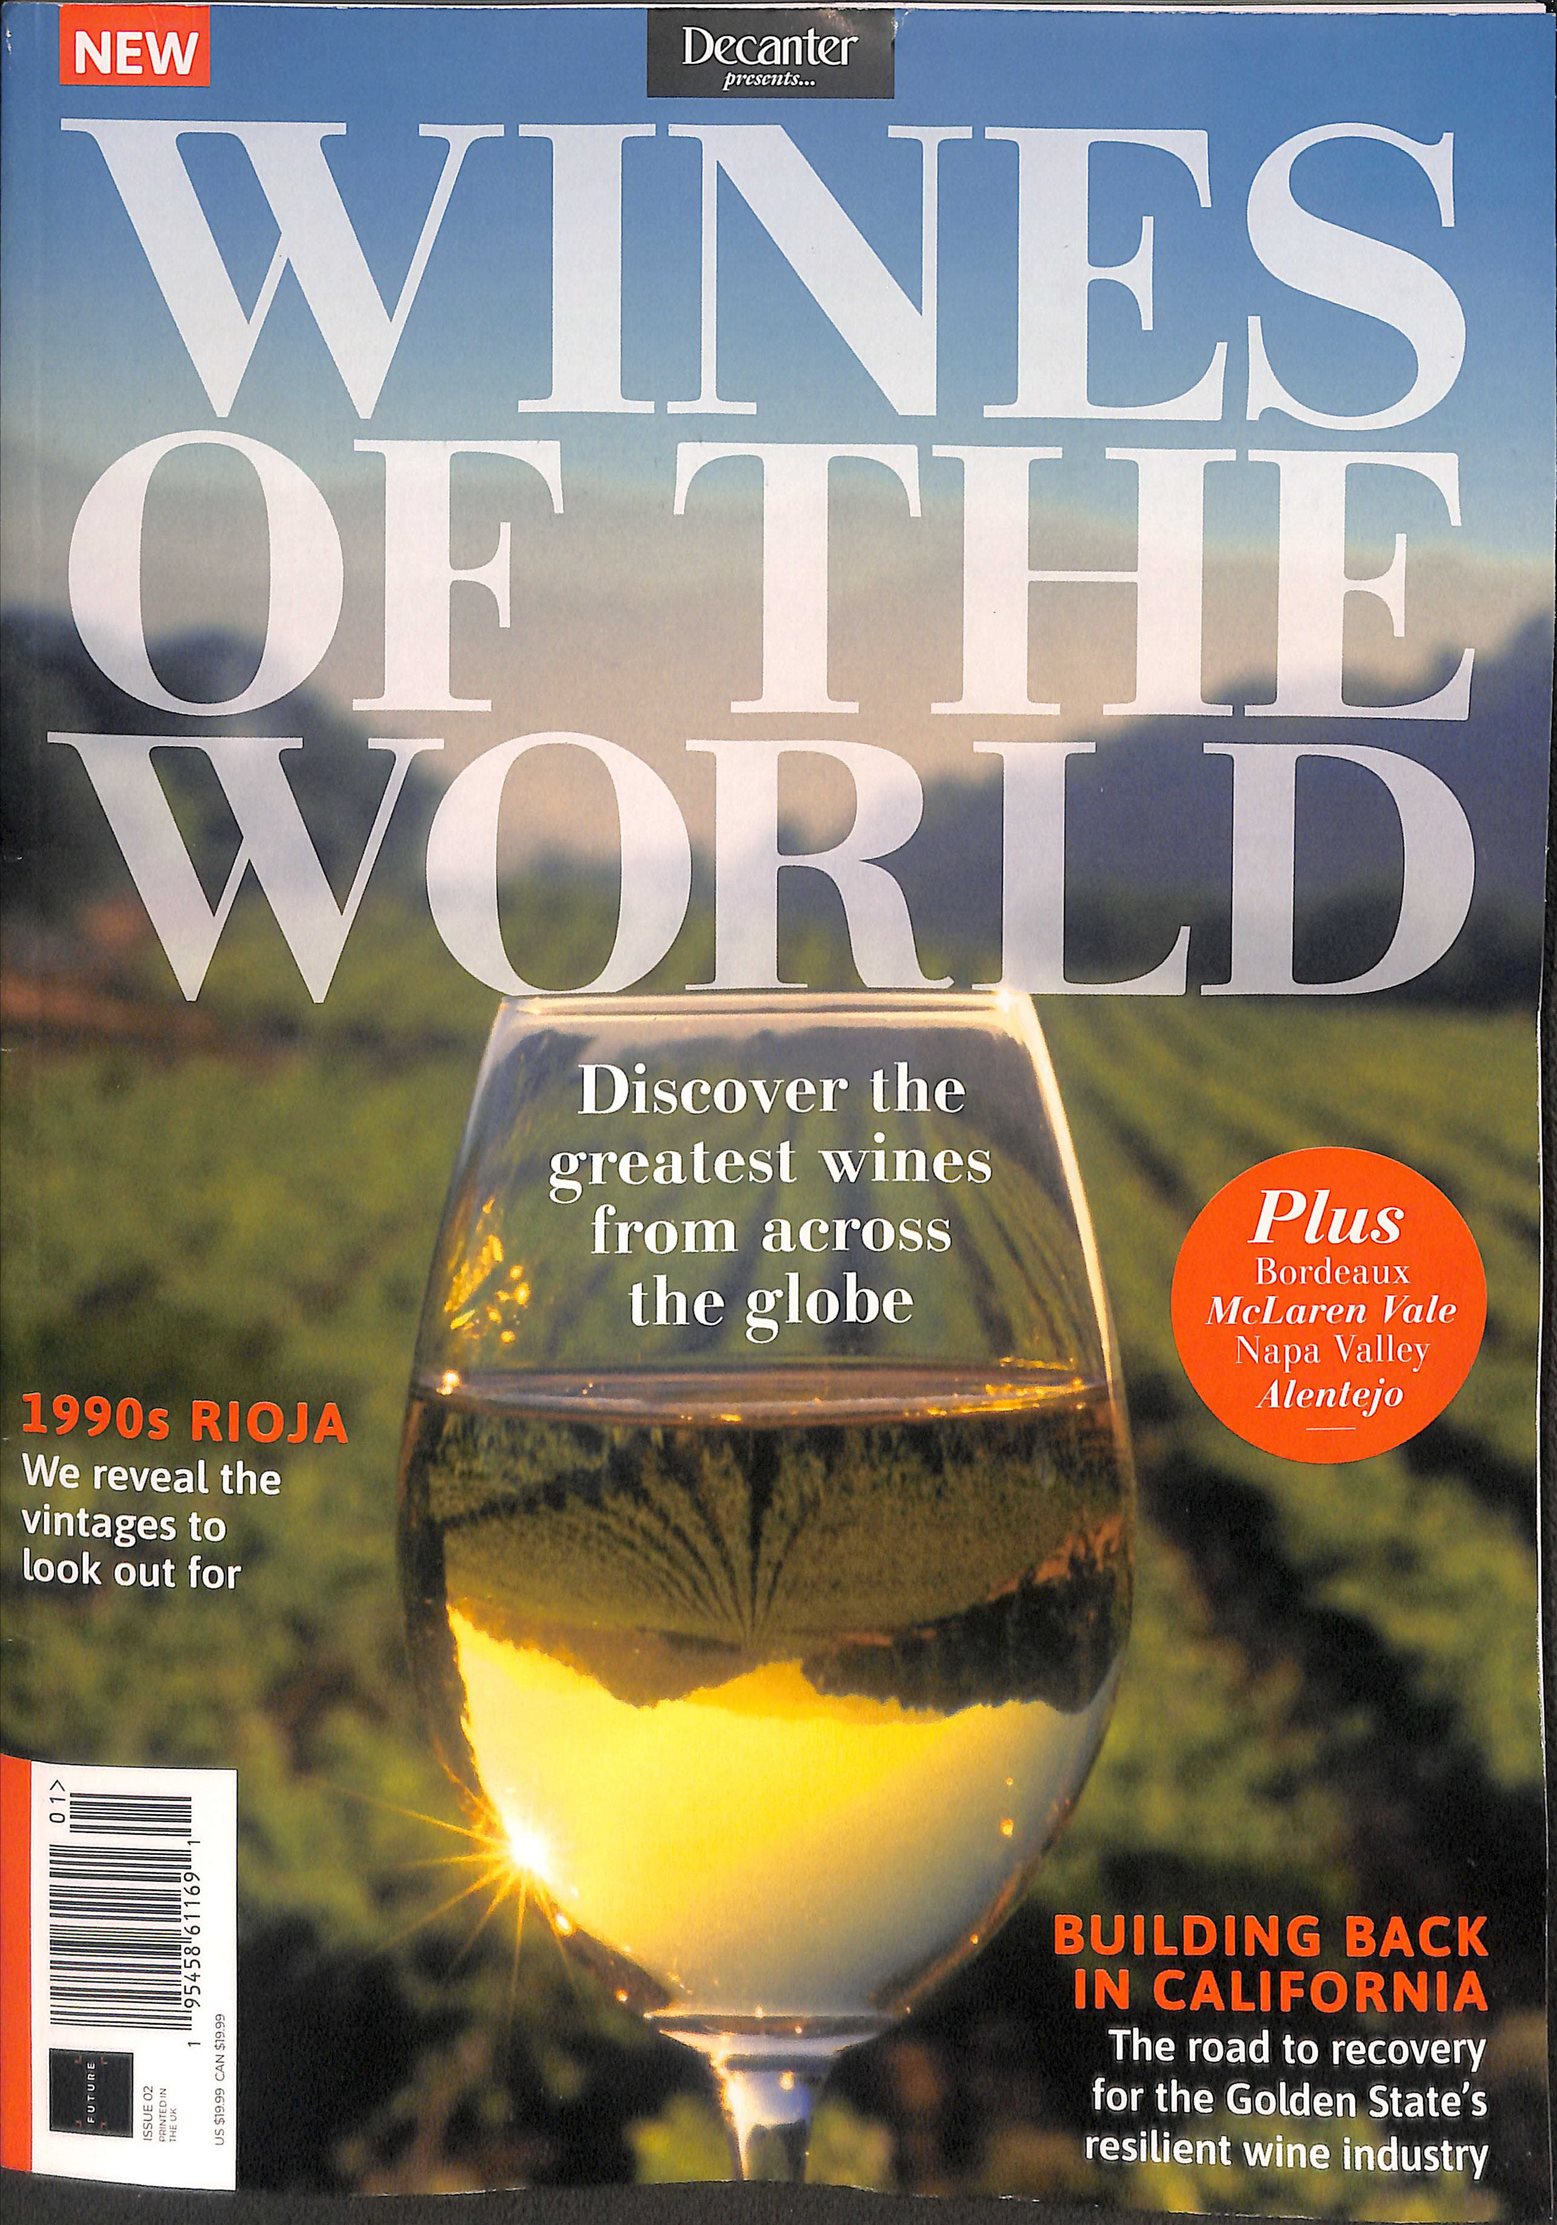 DECANTER WINES OF THE WO